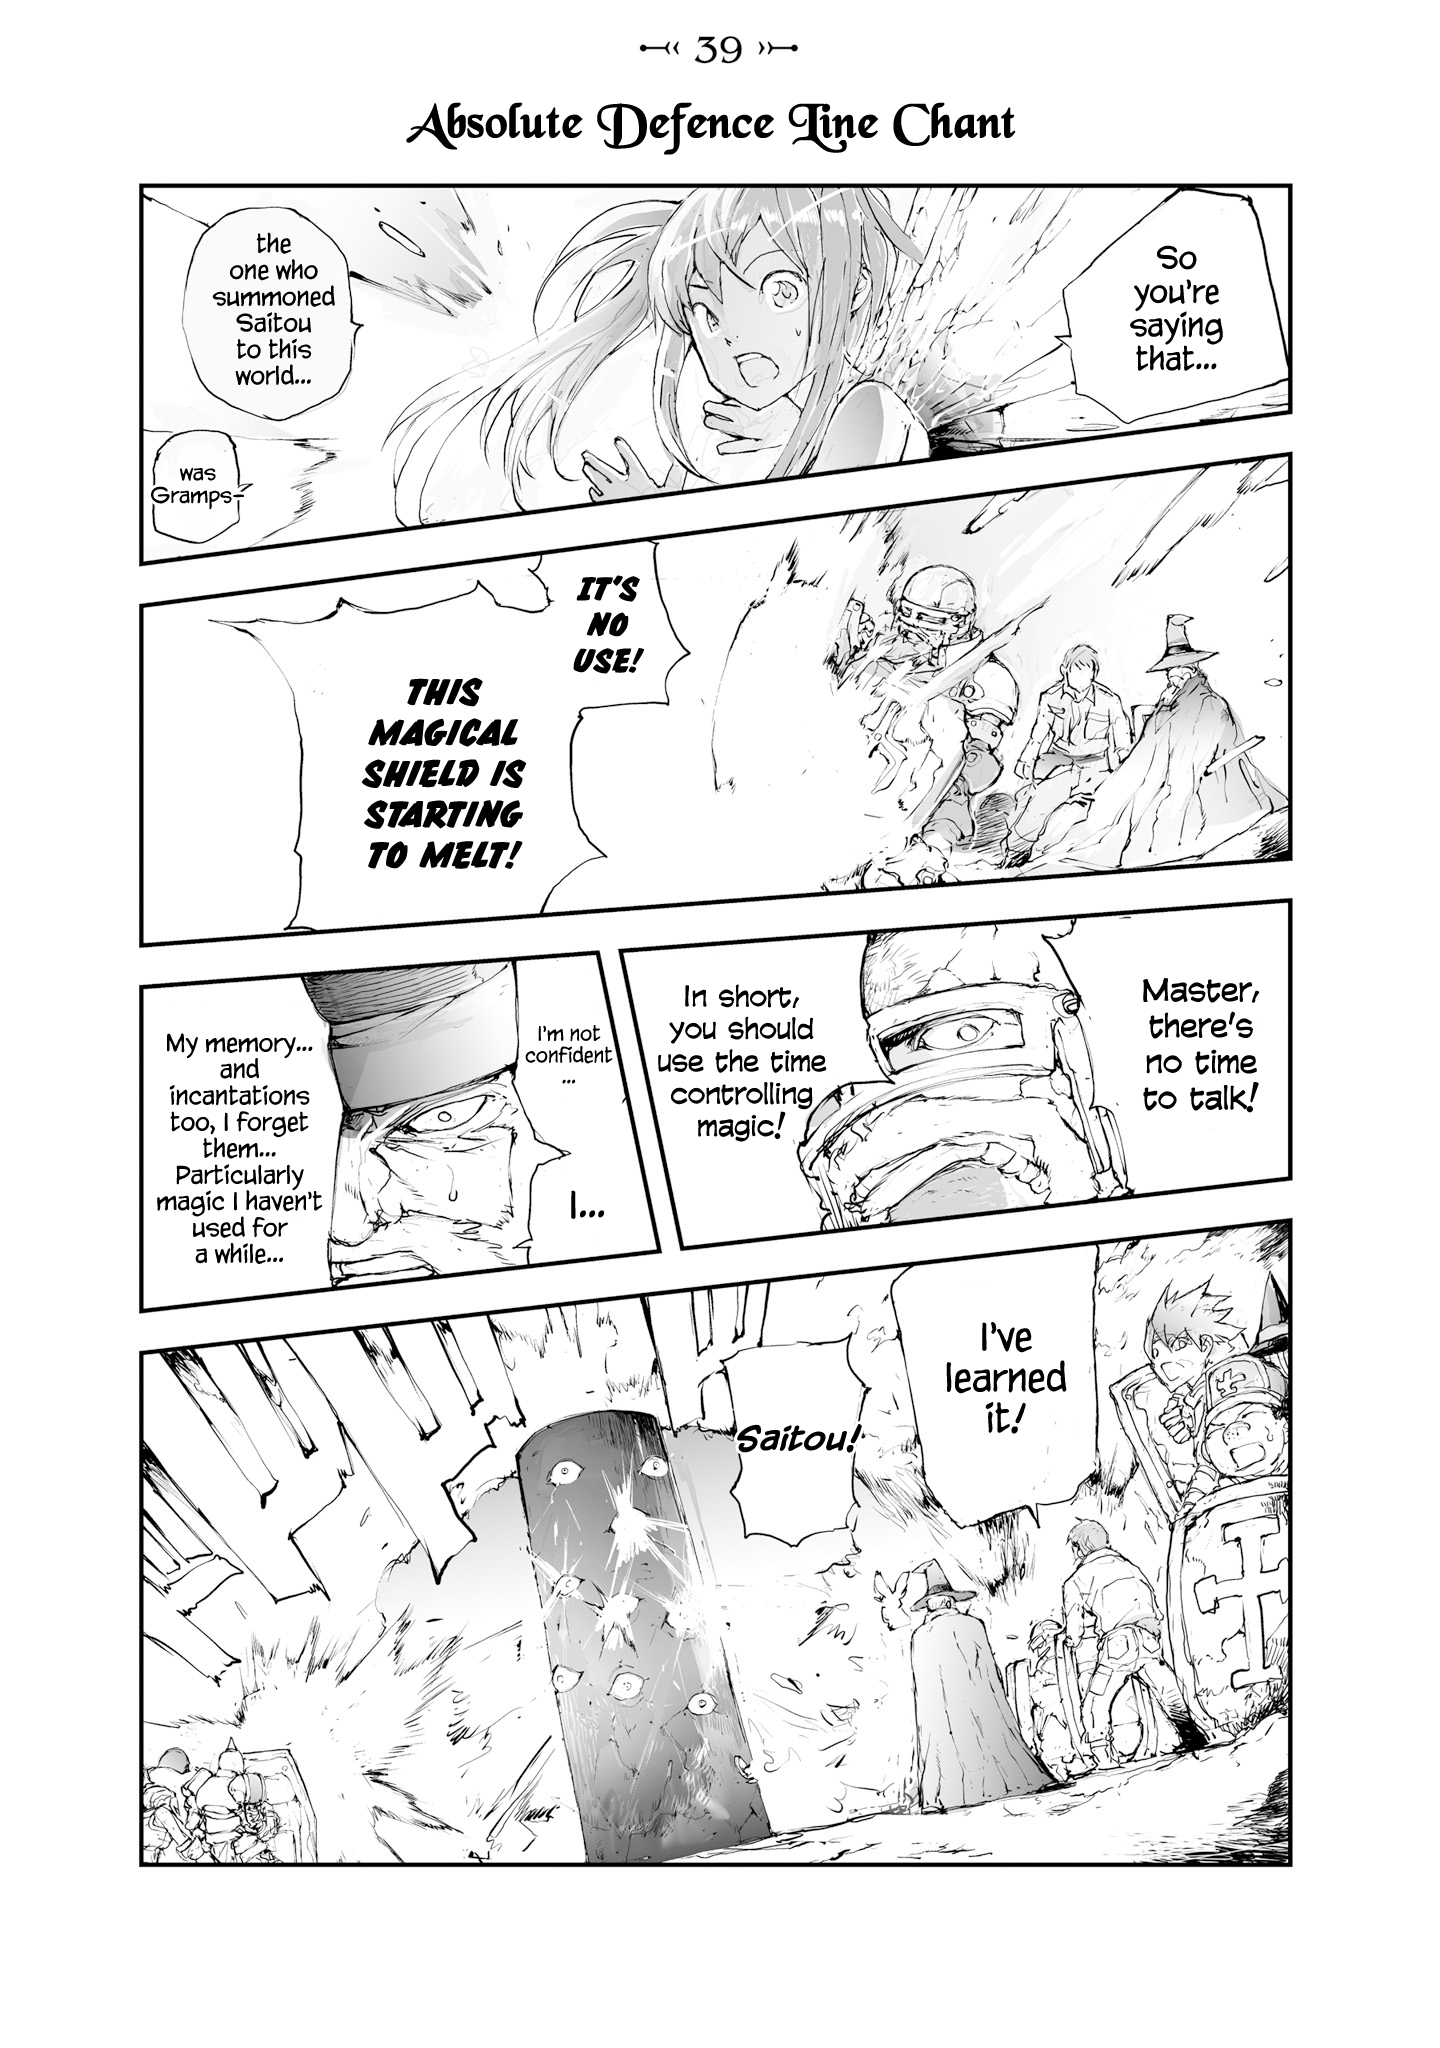 Handyman Saitou In Another World Vol.2 Chapter 39